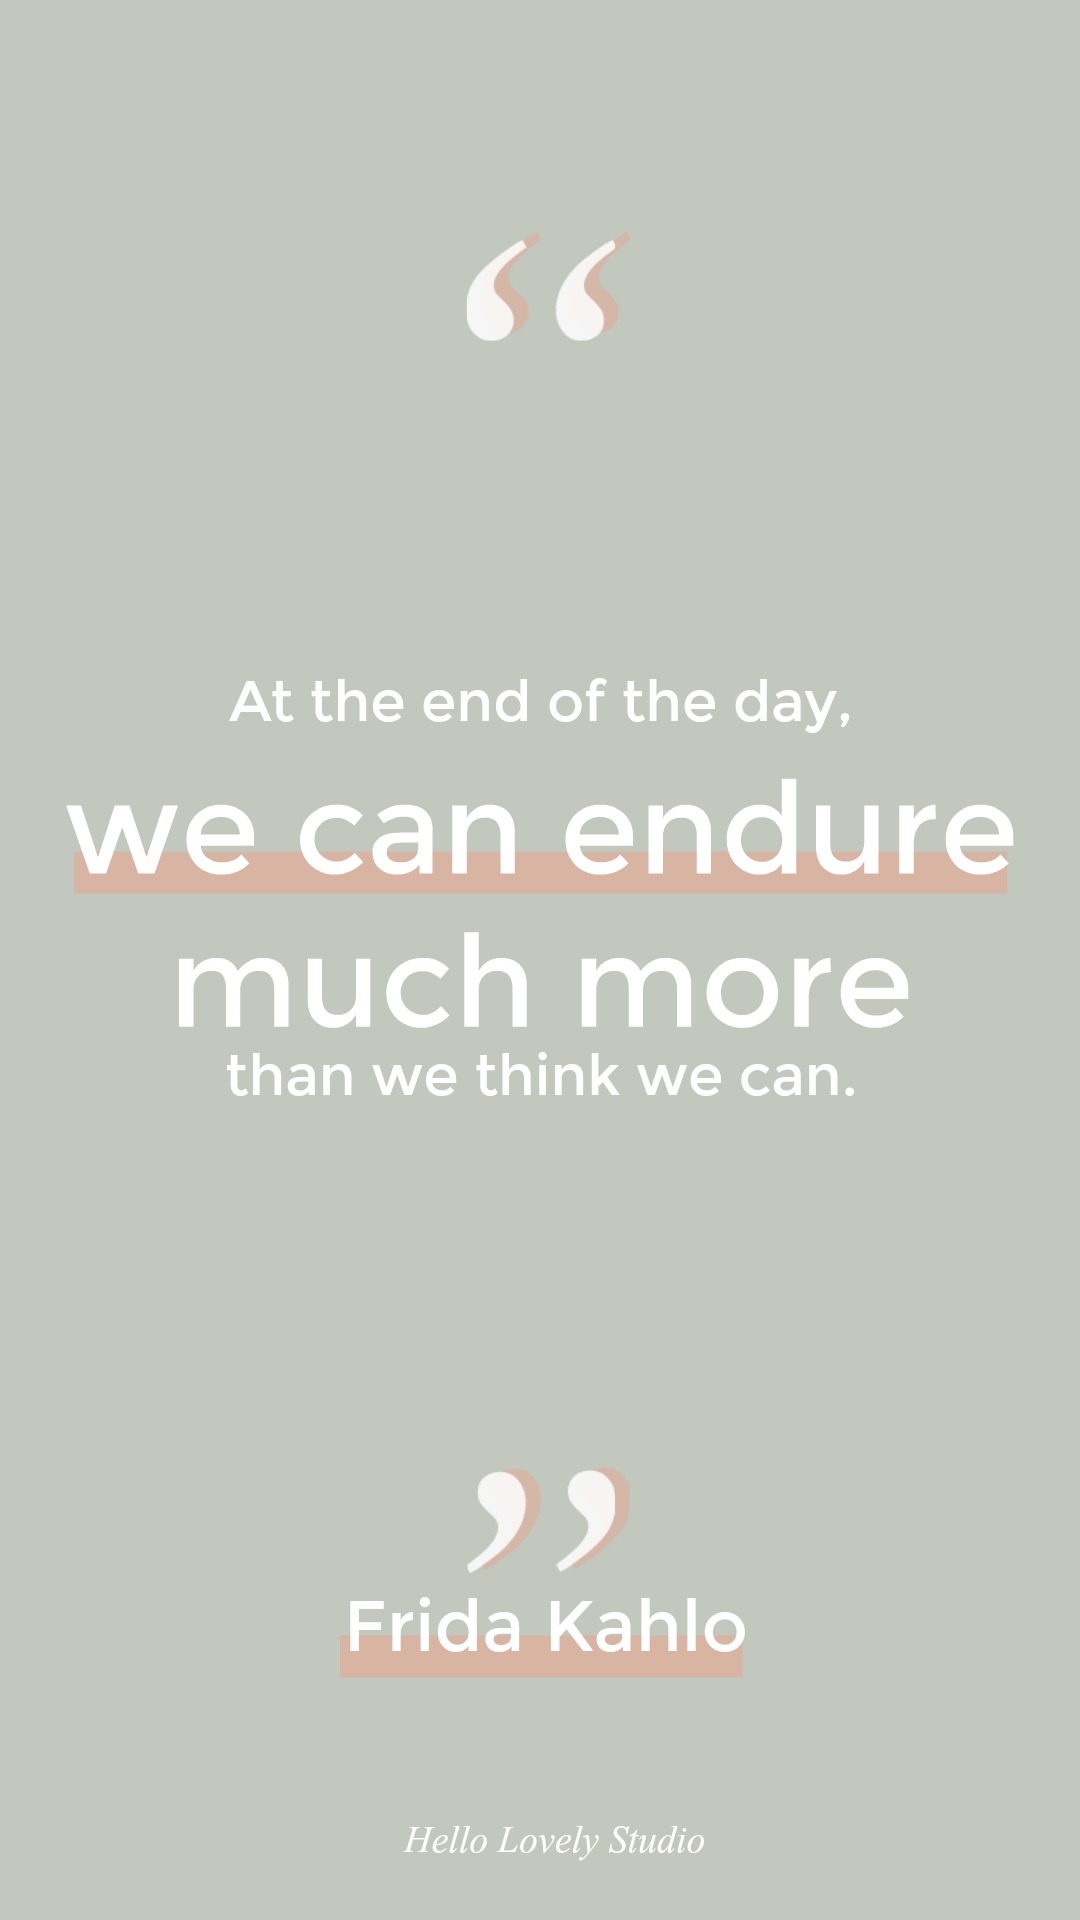 A wonderful inspirational quote about endurance from Frida Kahlo on Hello Lovely Studio. #quotes #inspirational #fridakahlo #endurance #encouragement #hope